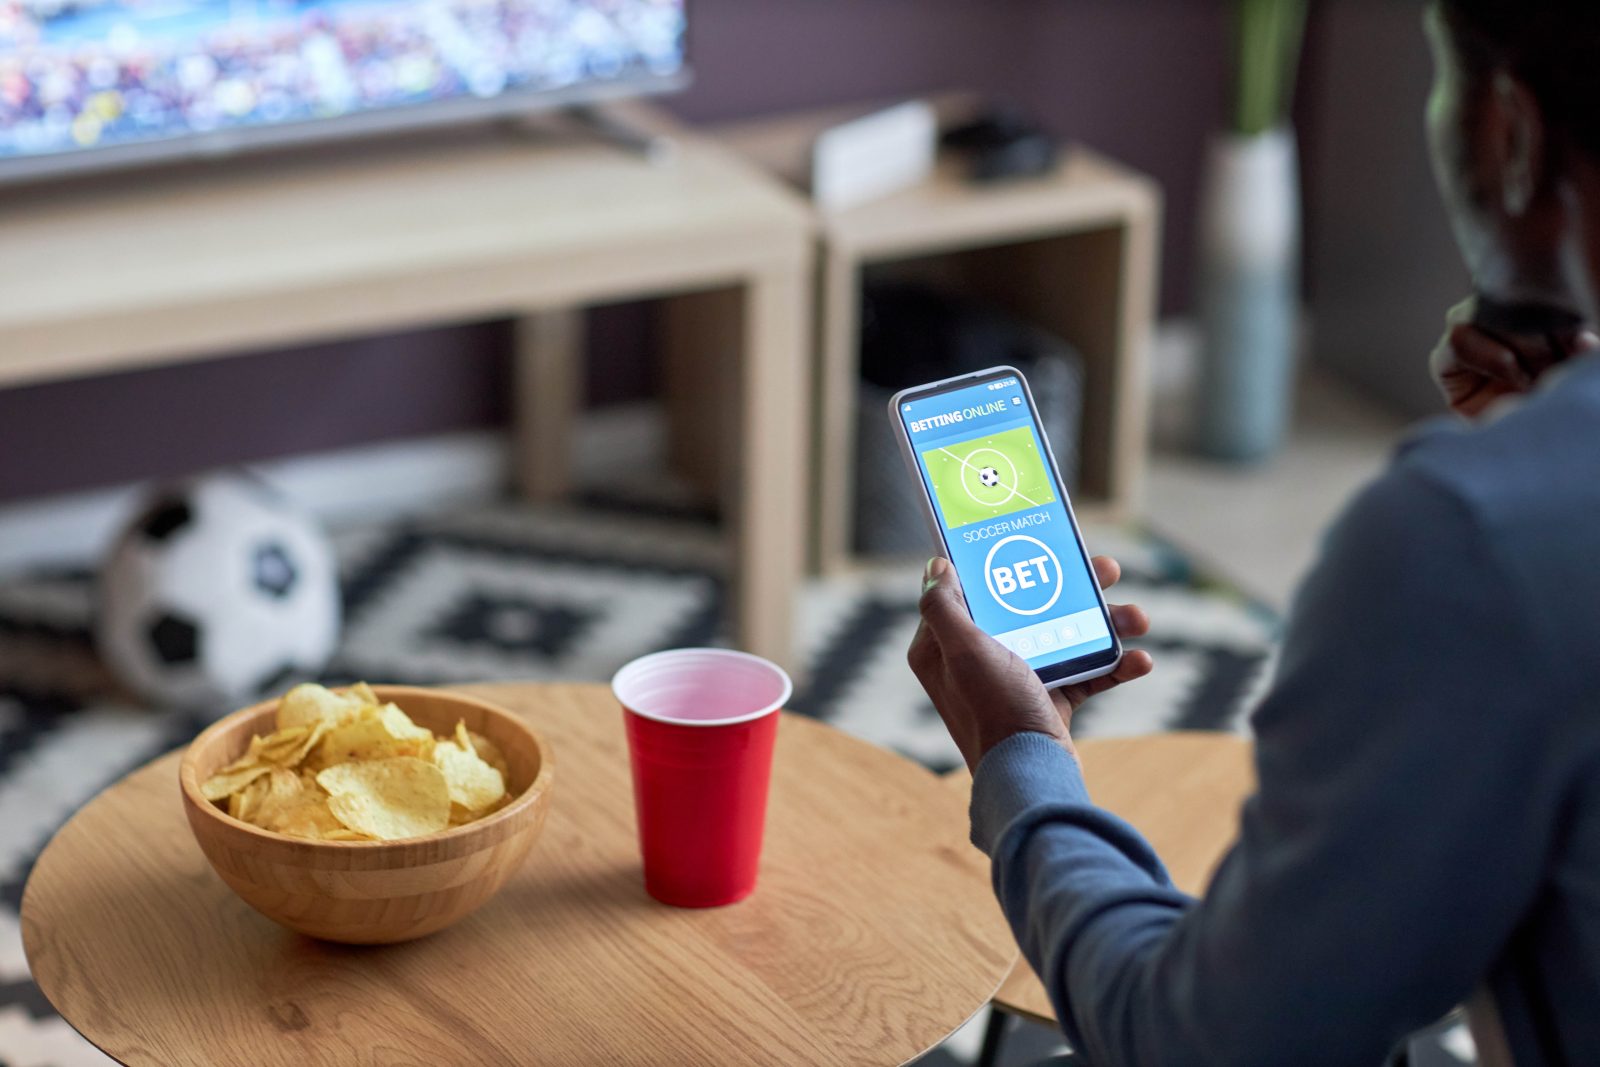 A hand holds a phone displaying that a bet has been placed next to food on a table with a blurred television in the background.